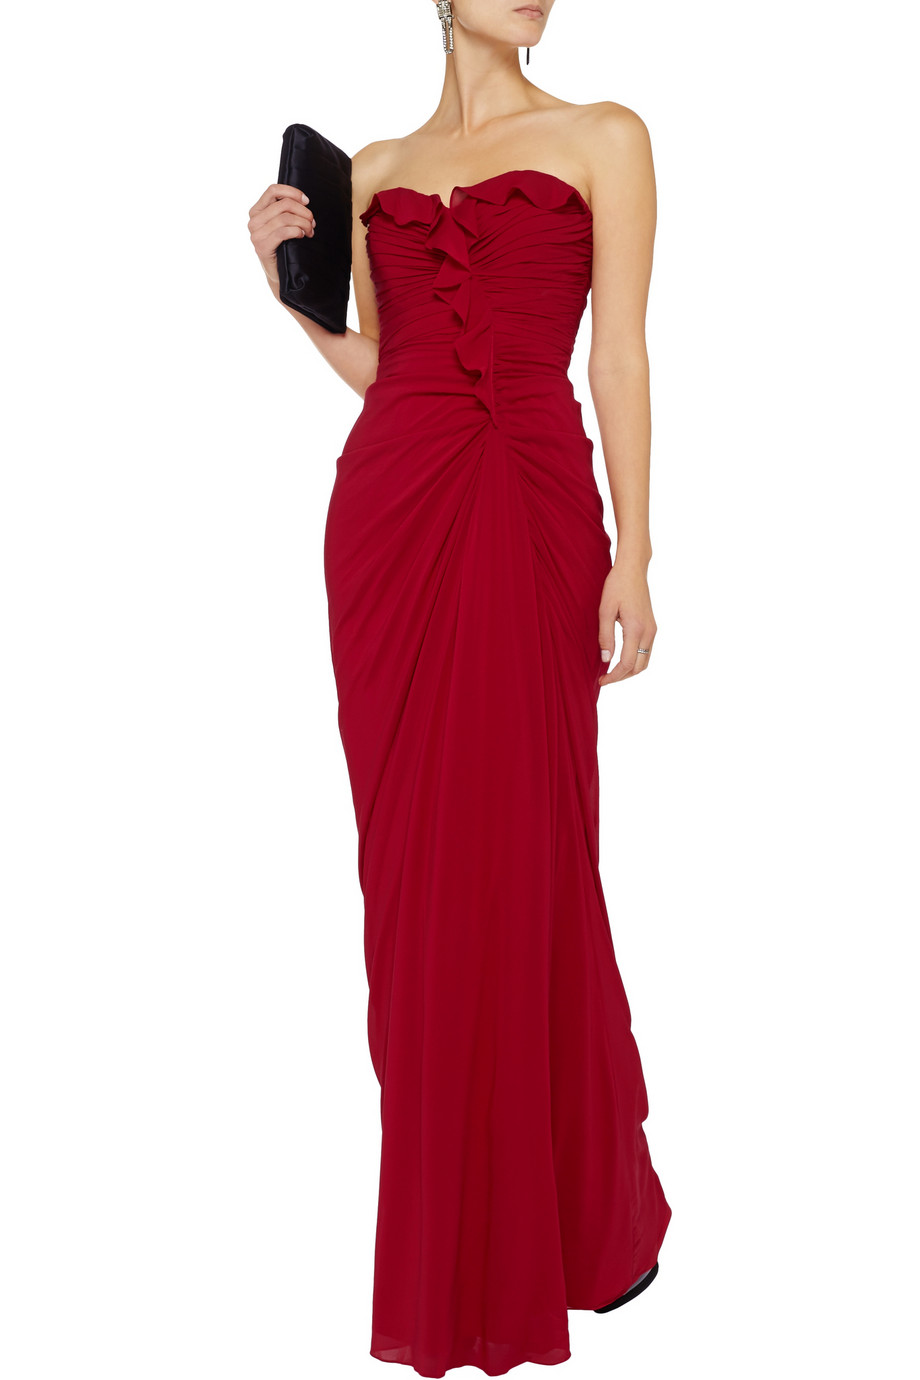 Lyst - Badgley Mischka Ruffled Silkblend Crepe Gown in Red